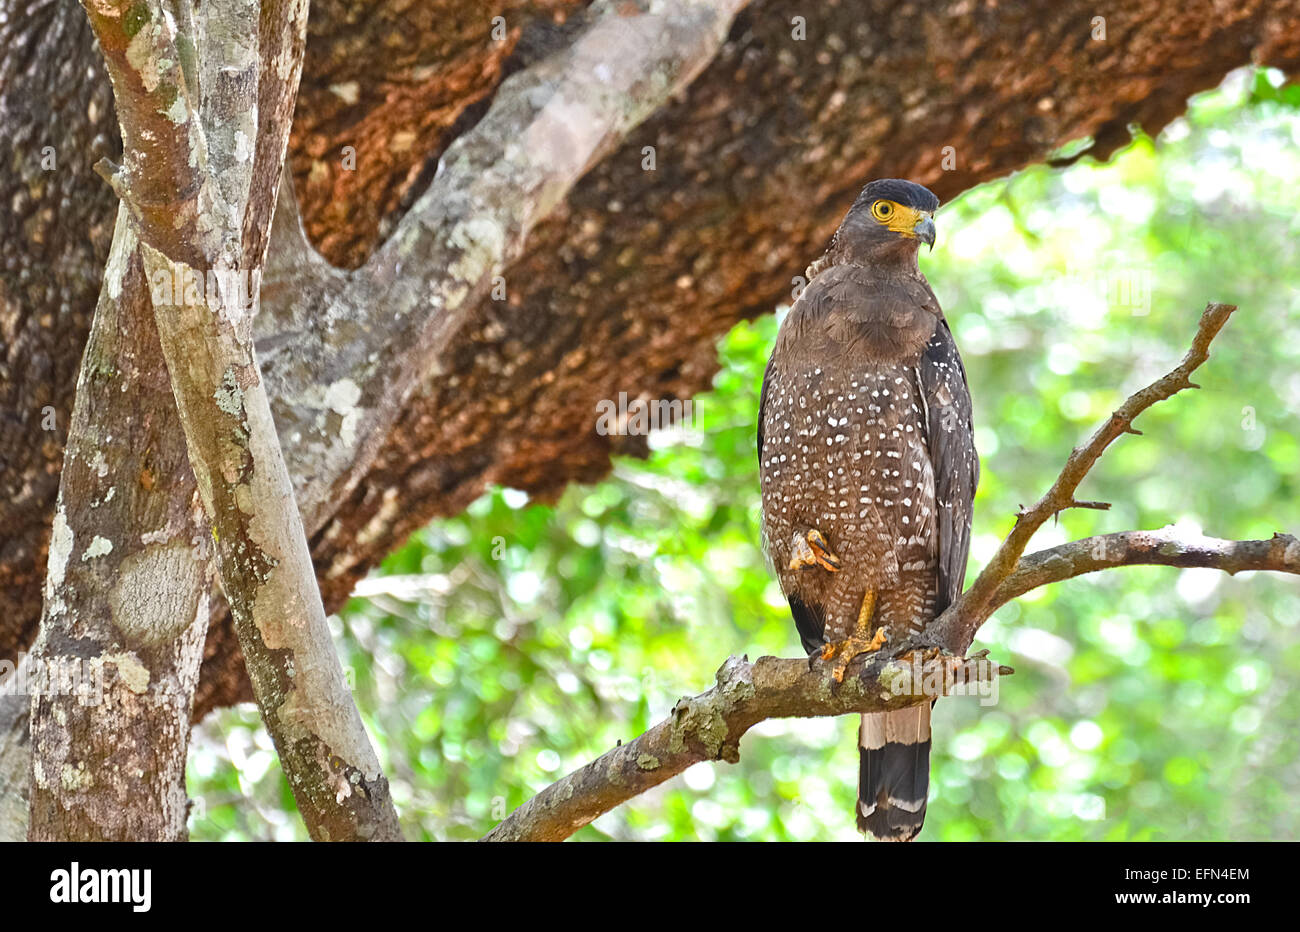 Crested Serpent Eagle At Wilpattu National Park Stock Photo